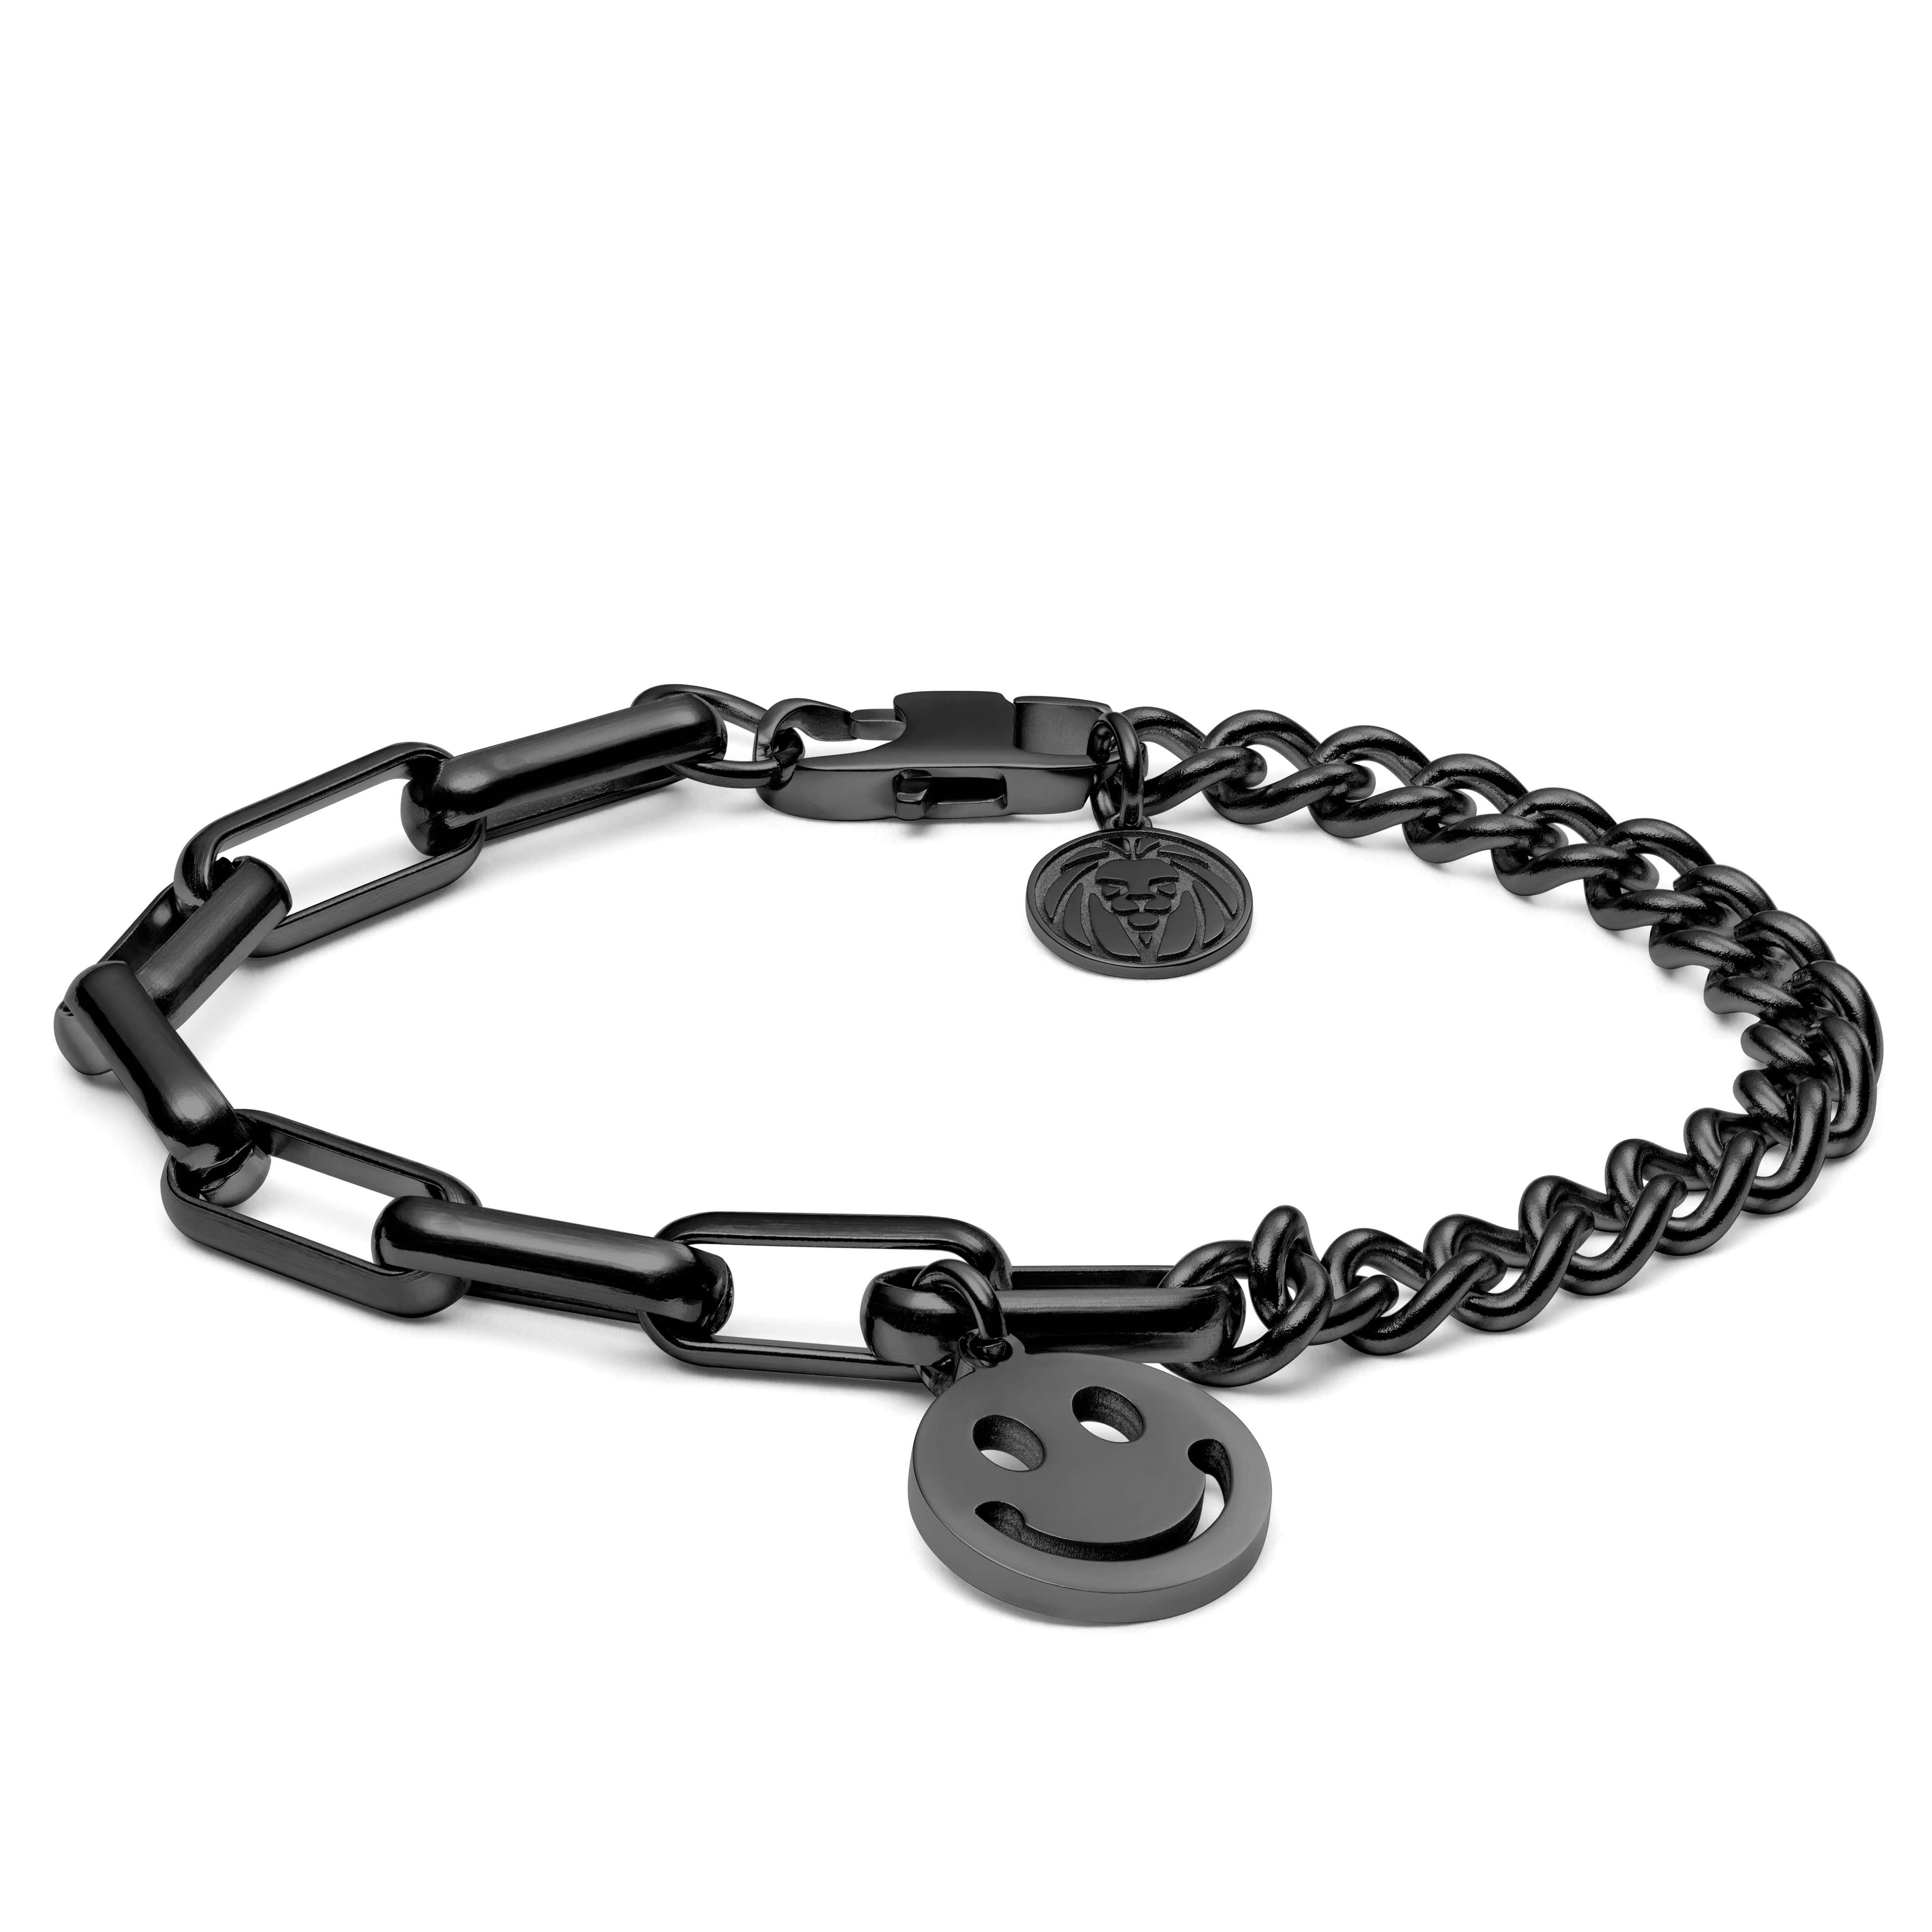 Clarke Amager Gunmetal Curb & Cable Chain Bracelet with Smiley Pendant